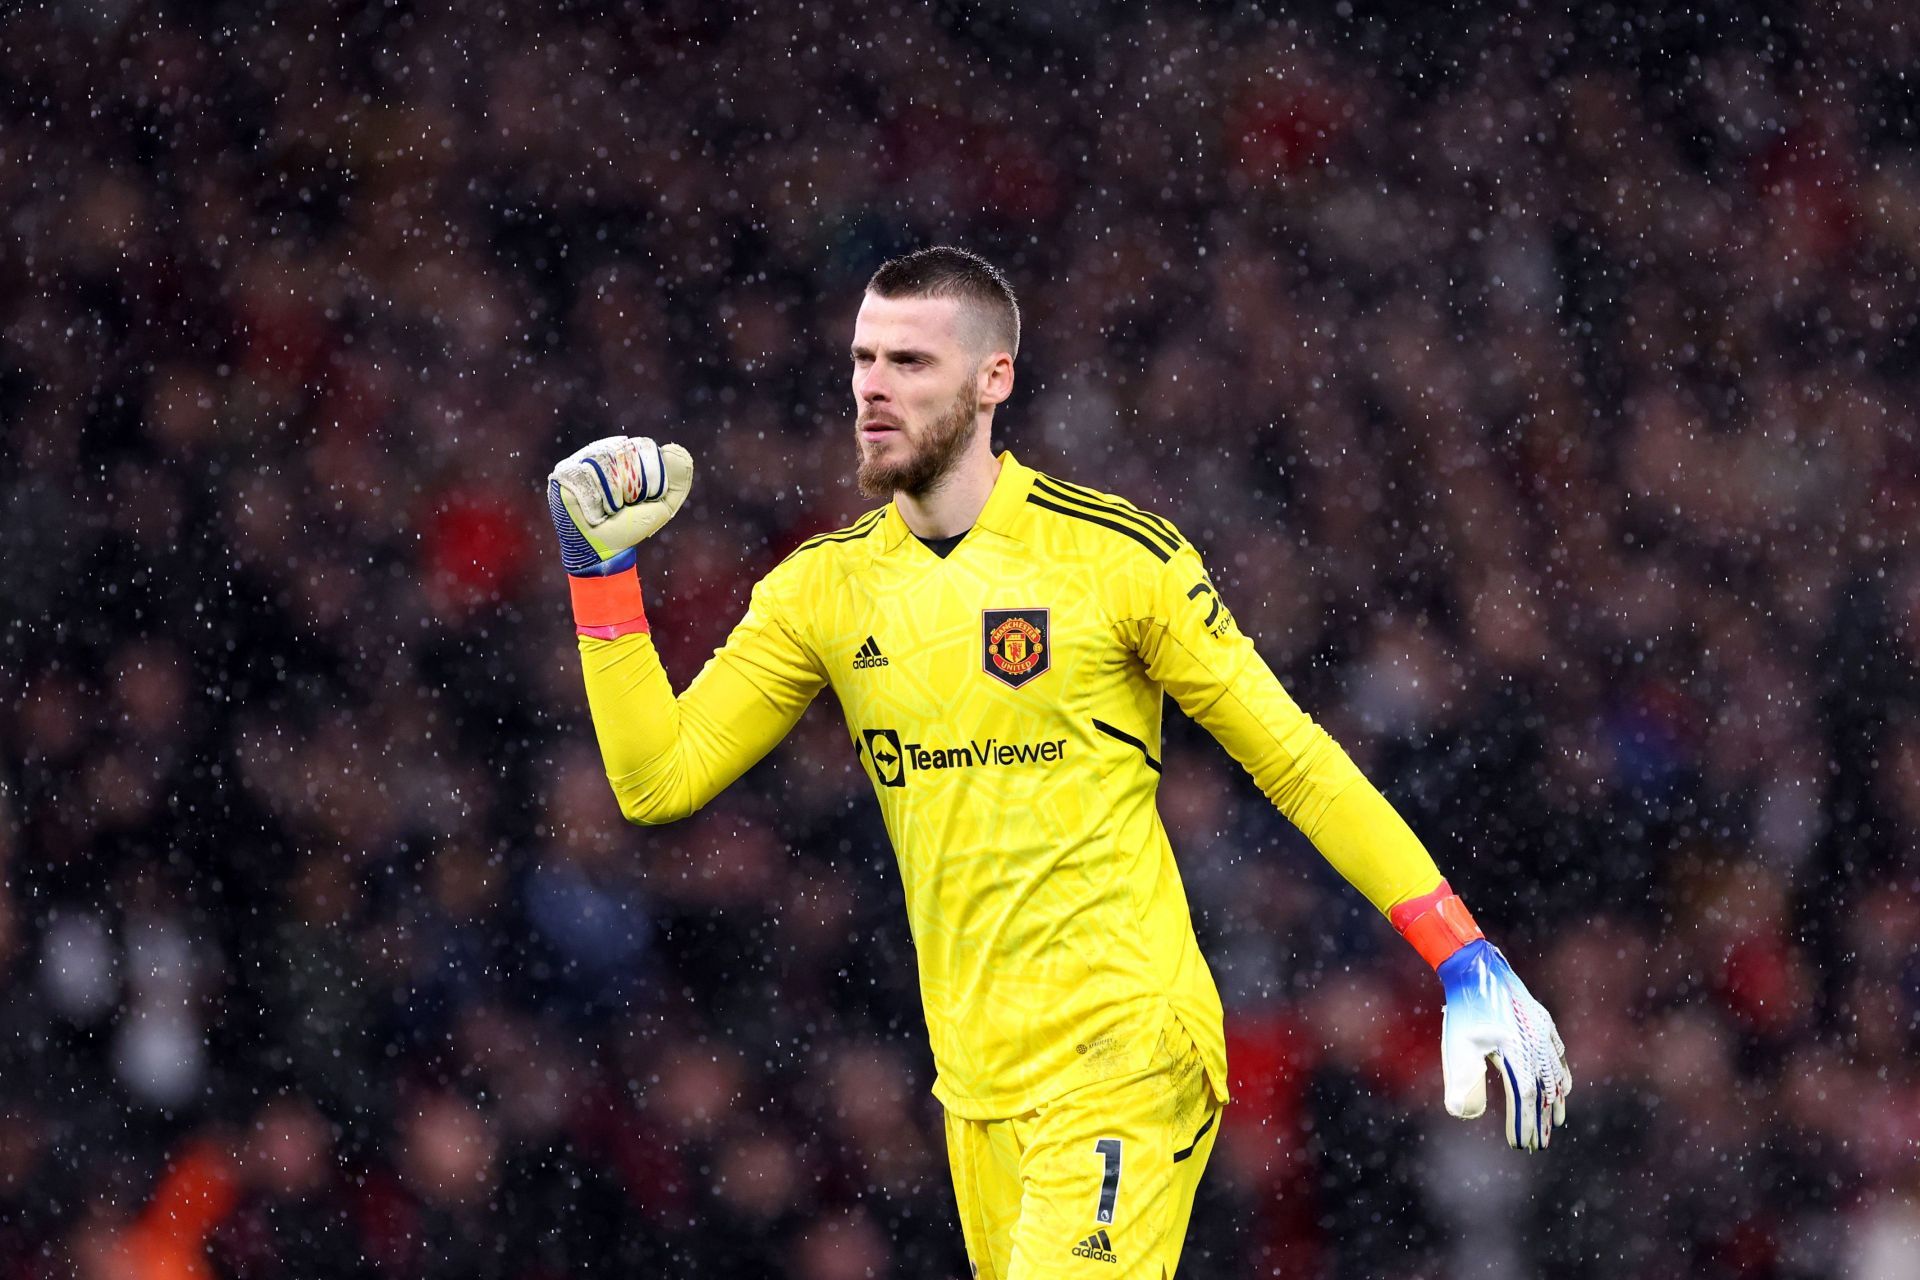 De Gea earned his clean sheet with an assured display in goal for United